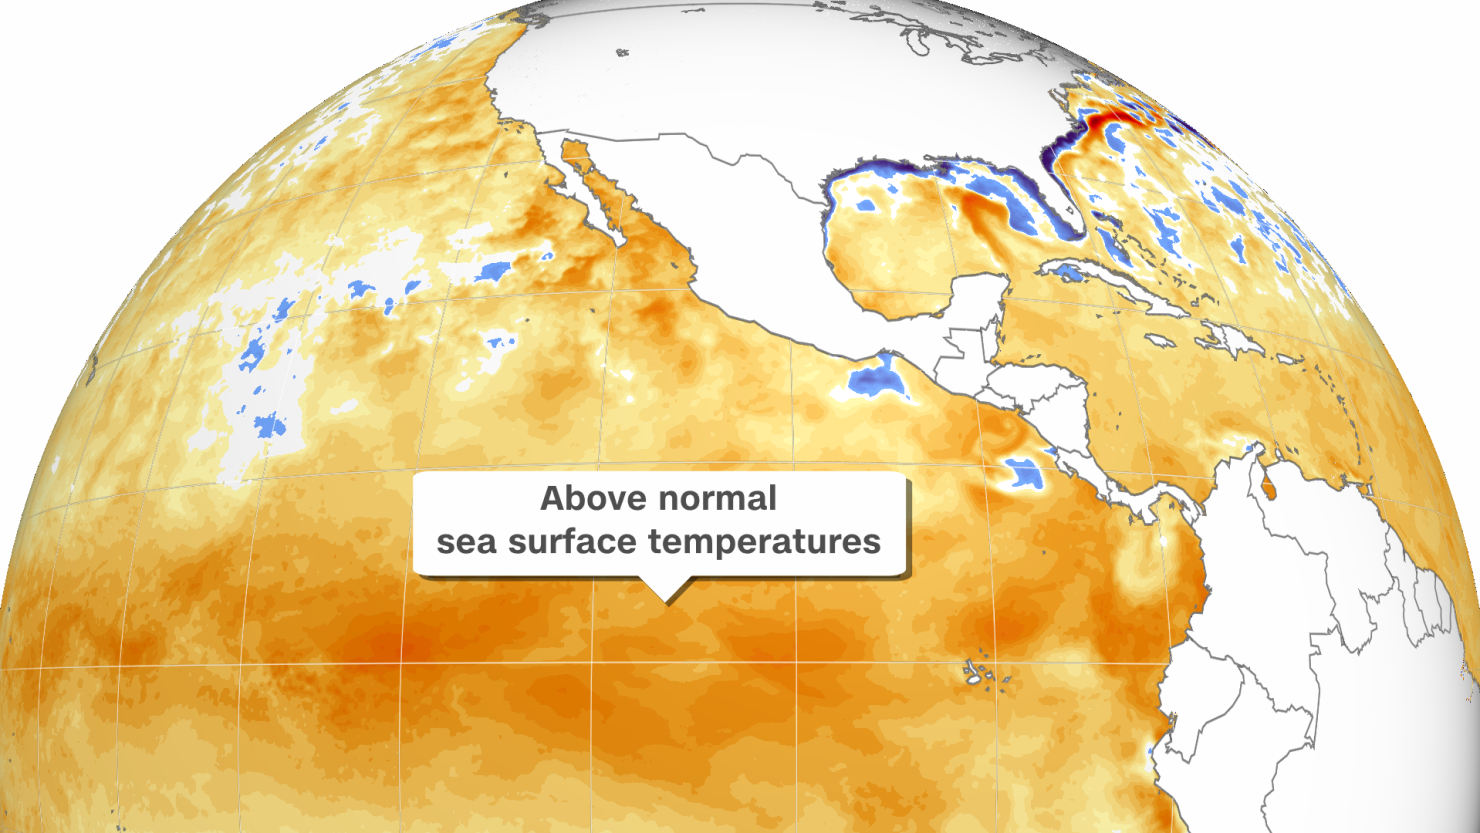 Sea-surface temperature anomalies are shown in the area of the eastern Pacific Ocean where a very strong El Niño is present on Wednesday, February 7, 2024. Darker oranges represent warmer than normal conditions while blues represent cooler than normal conditions. These ocean temperatures help determine the strength of El Niño.